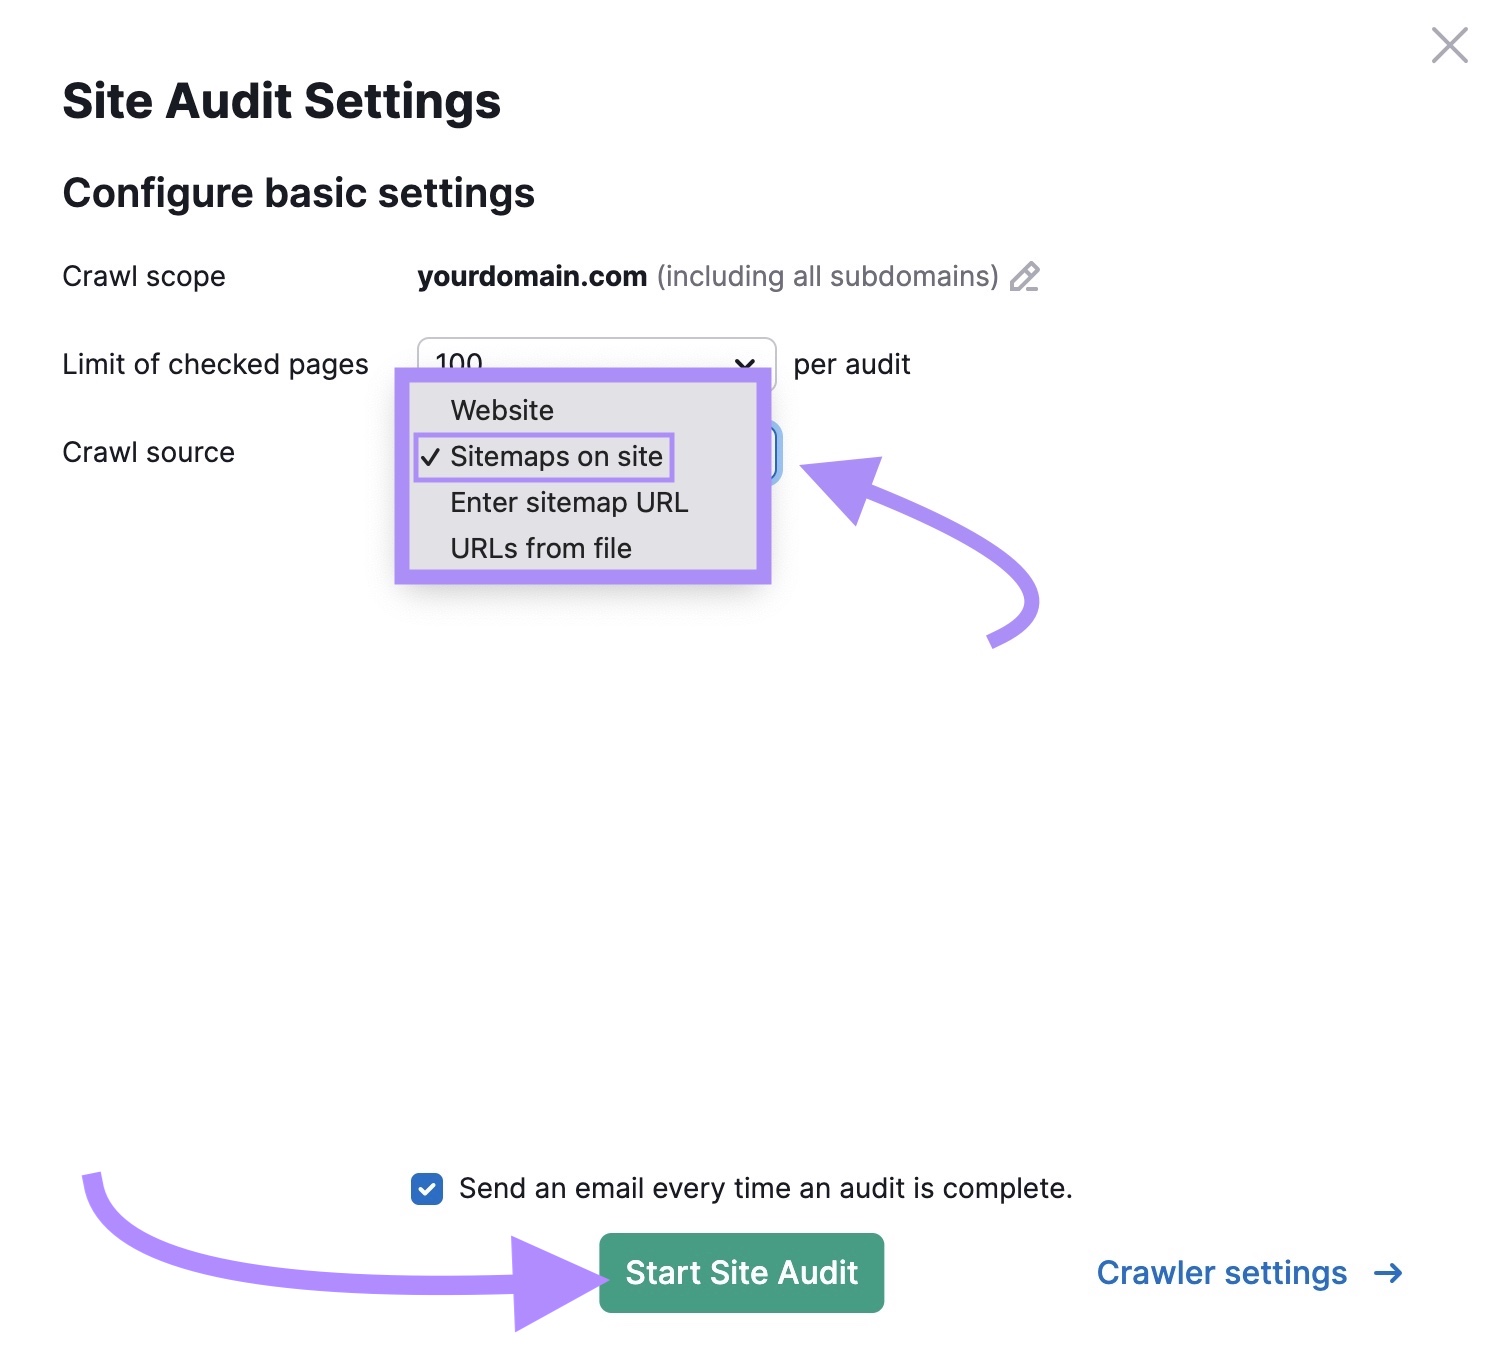 "Sitemaps on site" option selected in "Crawl source" menu in Site Audit tool settings